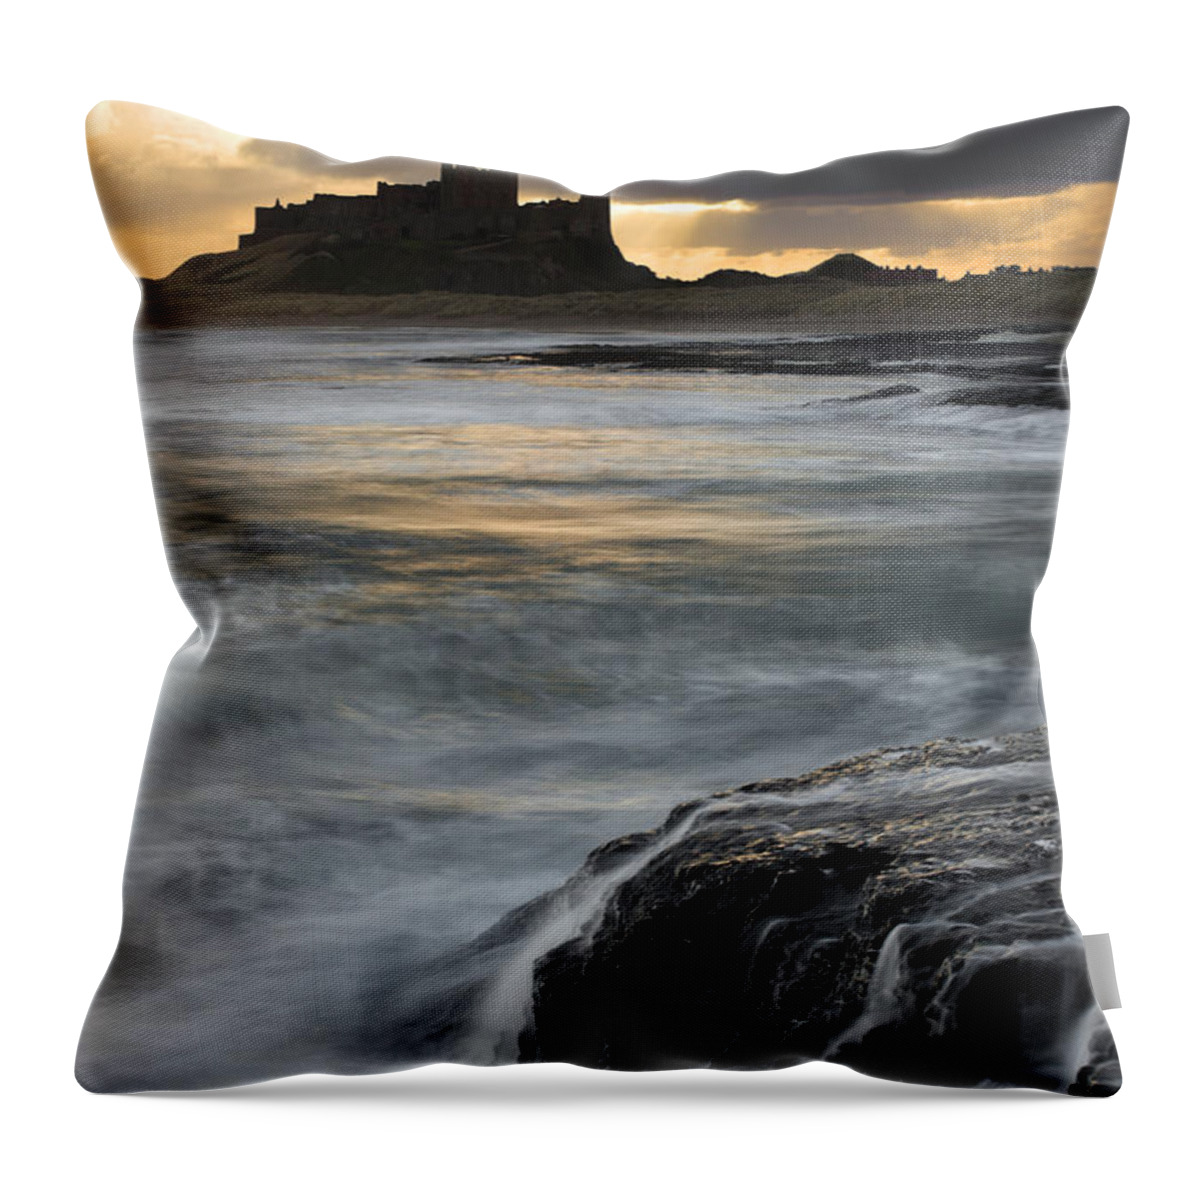 Scenics Throw Pillow featuring the photograph View Of Bamburgh Castle At Sunset by David Clapp